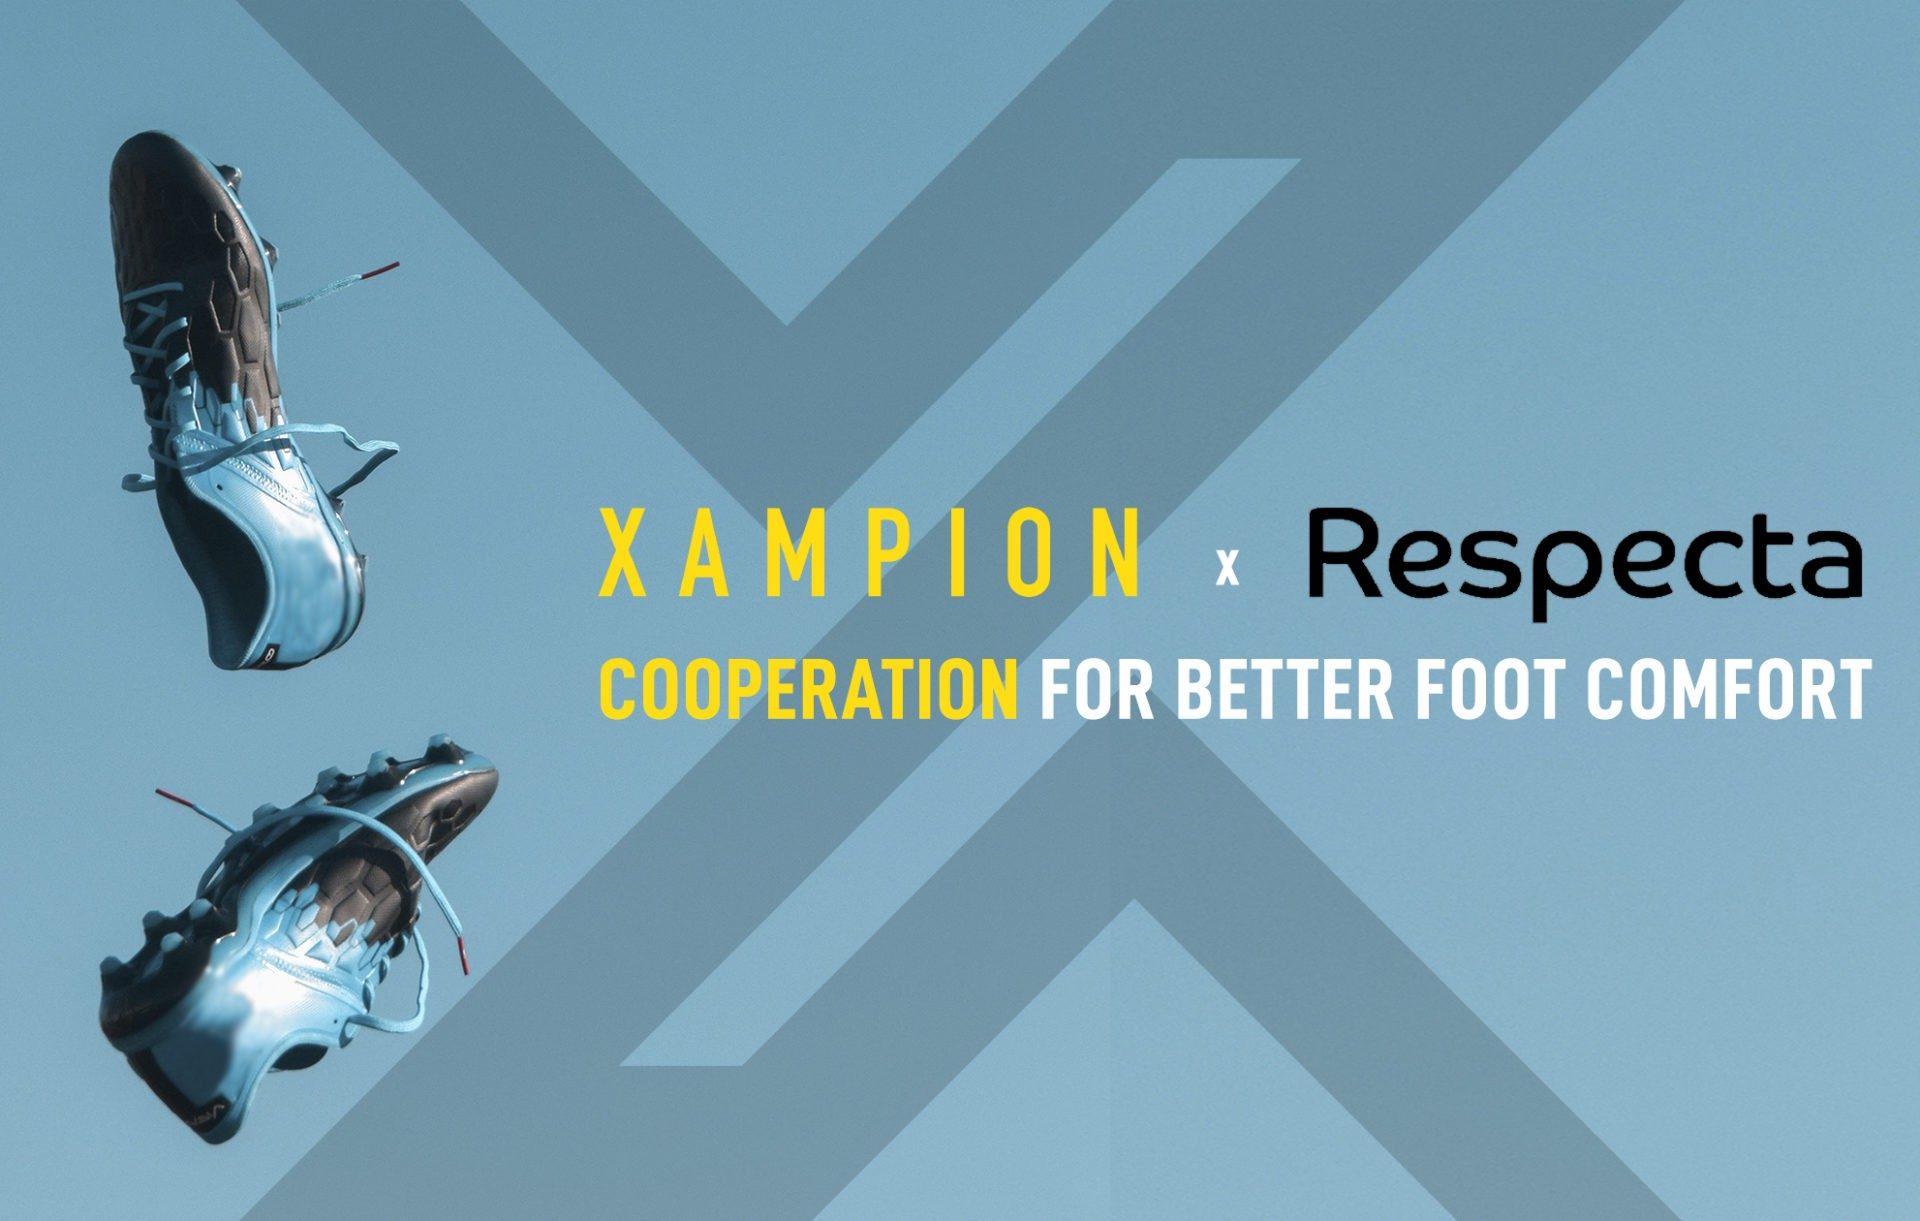 Xampion and Respecta in cooperation